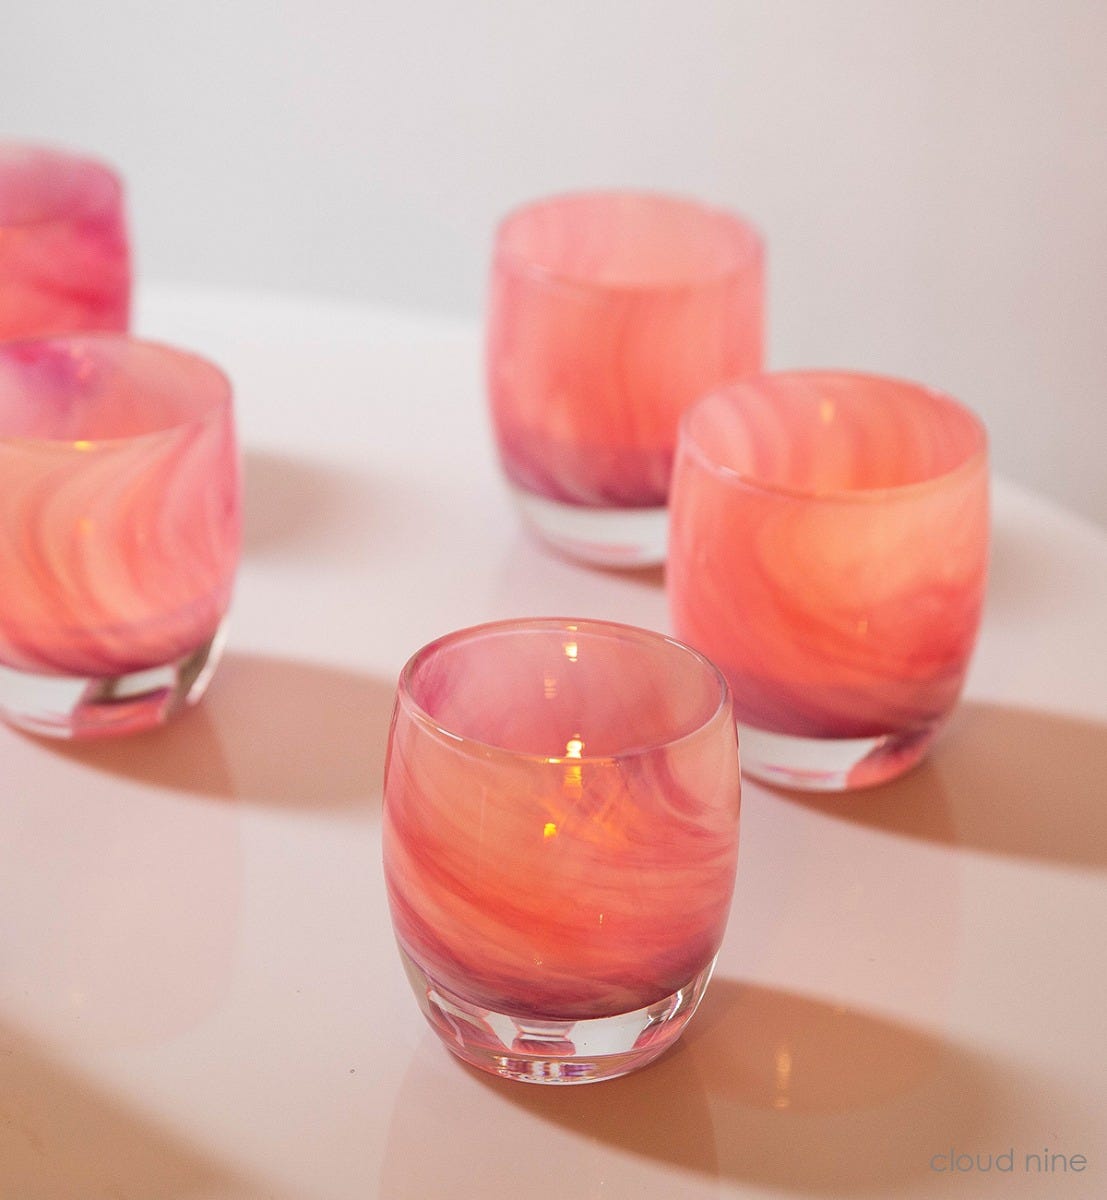 cloud nine pink and white swirl hand-blown glass votive candle holder